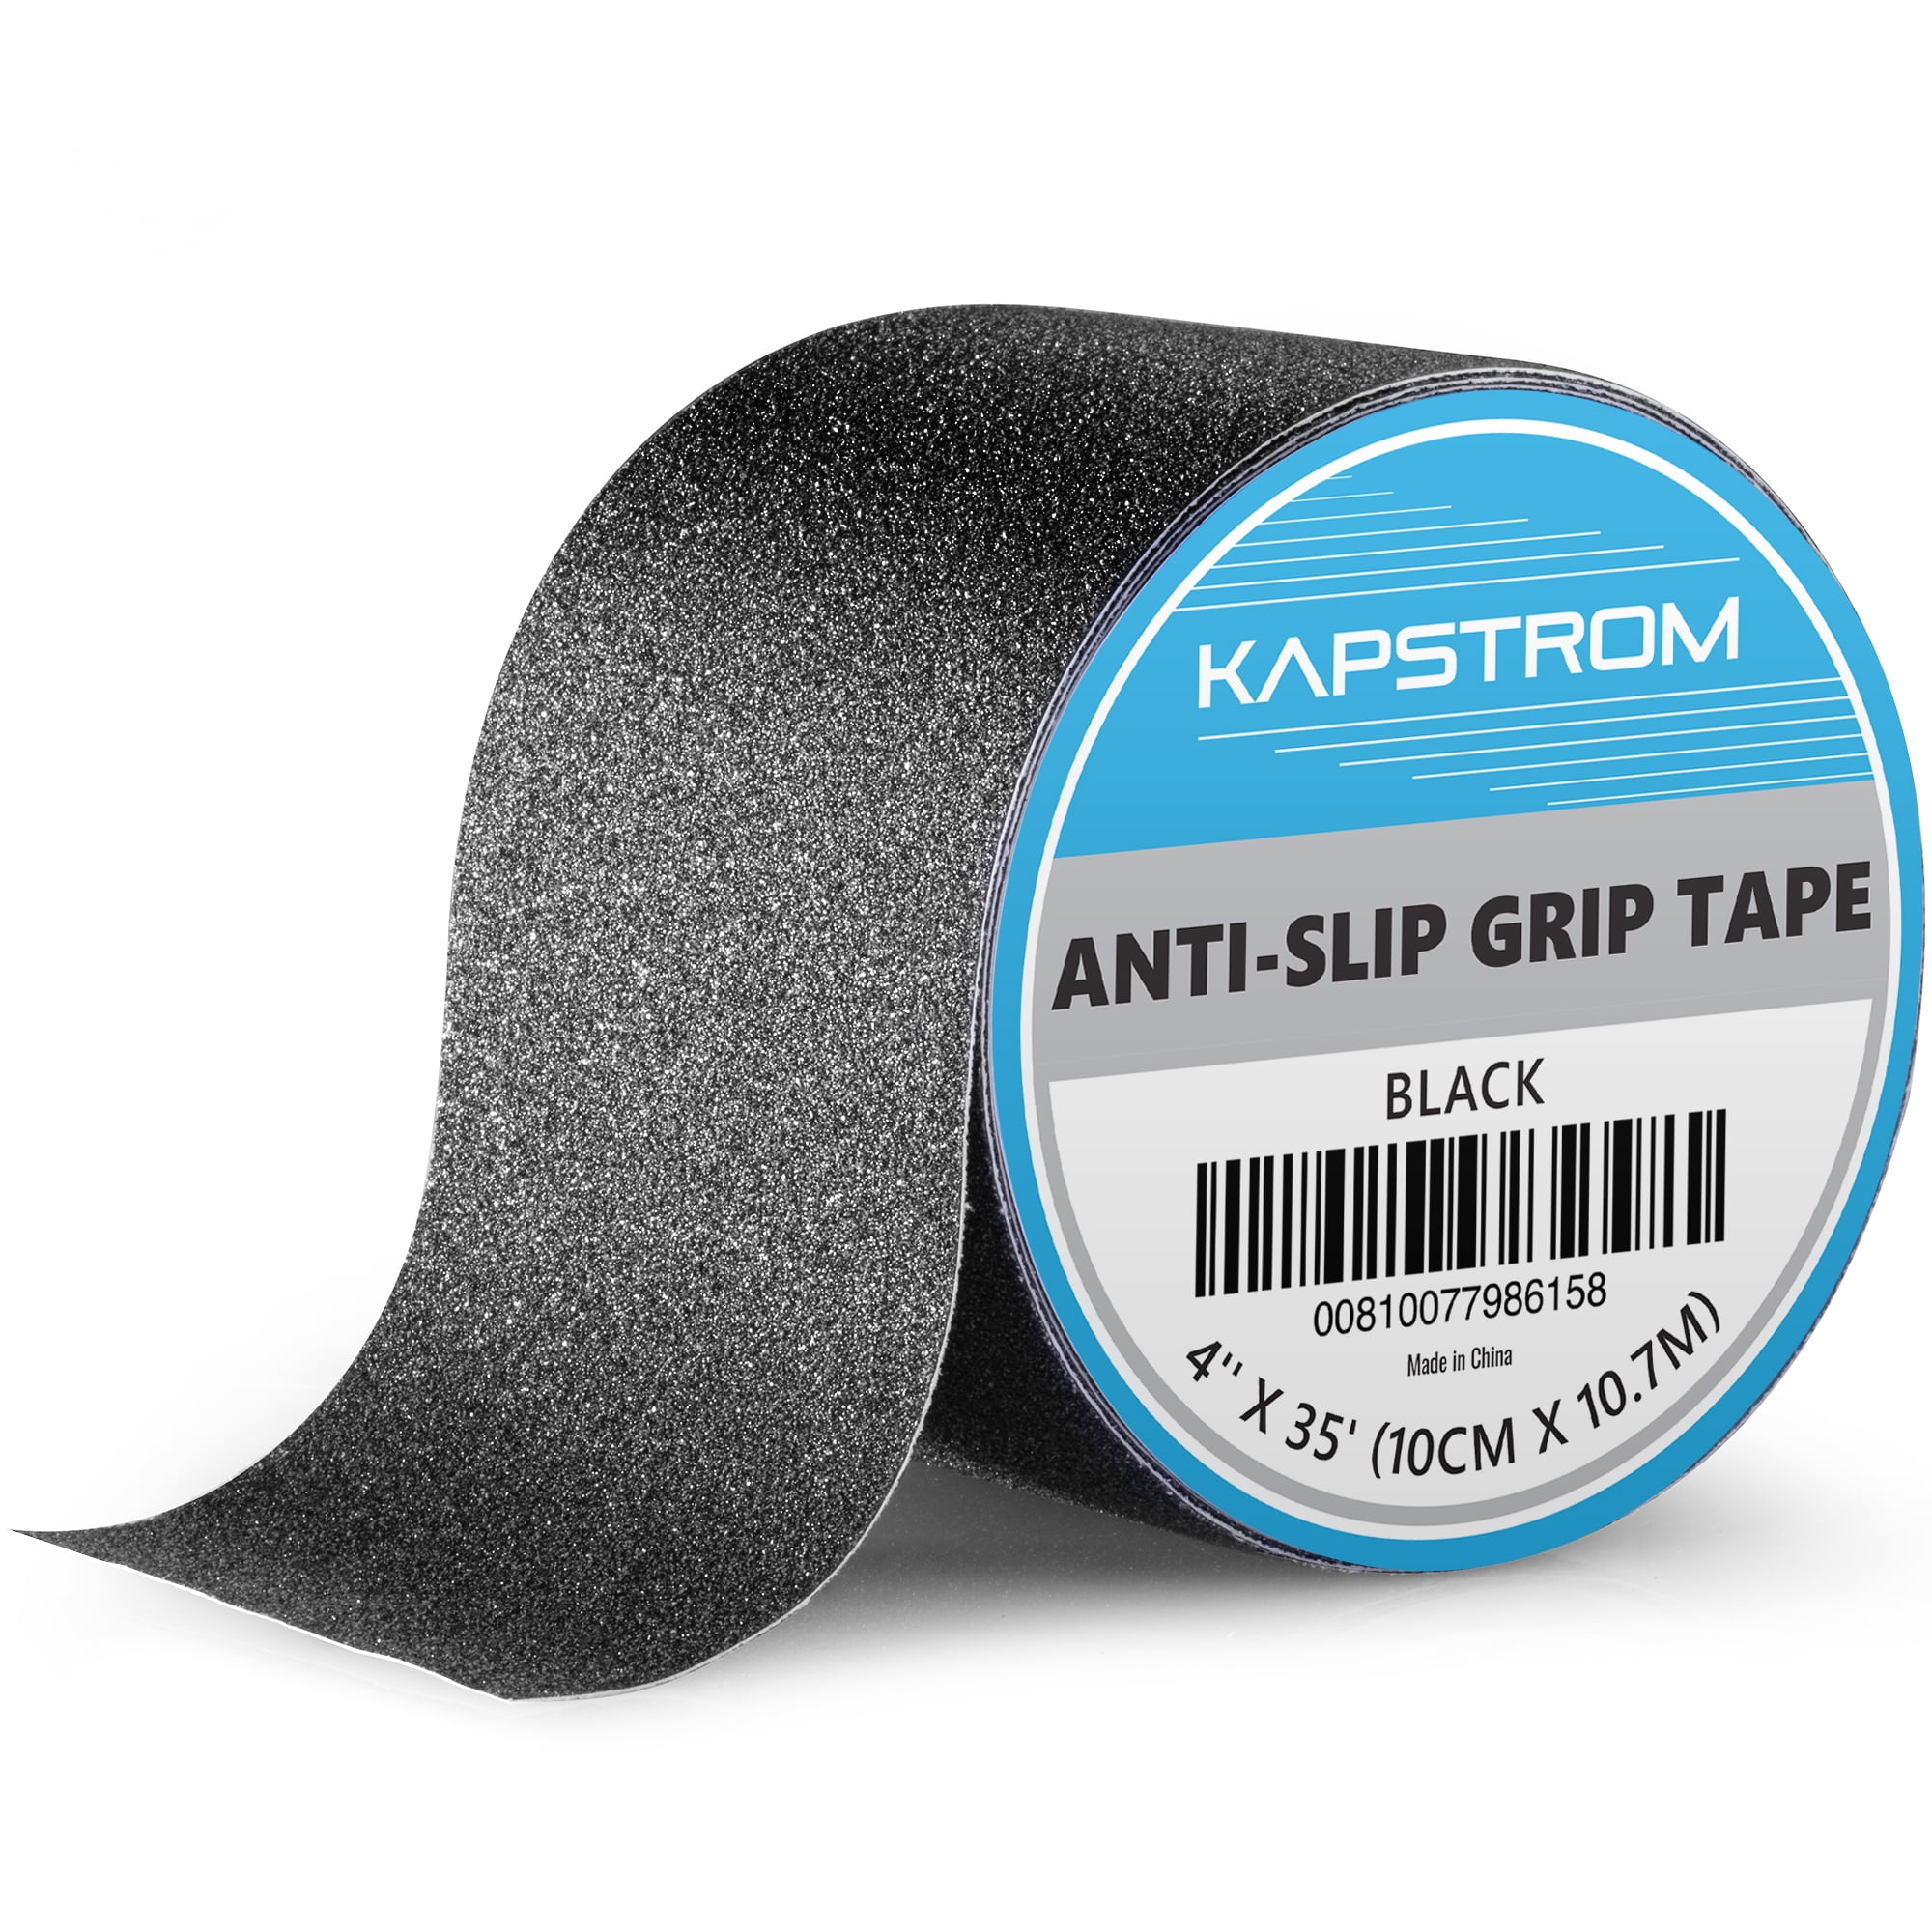 Grip Tape W/ 35 Ft Long 4-inch Wide Black Slip Tape For Stairs by KapStrom - Walmart.com